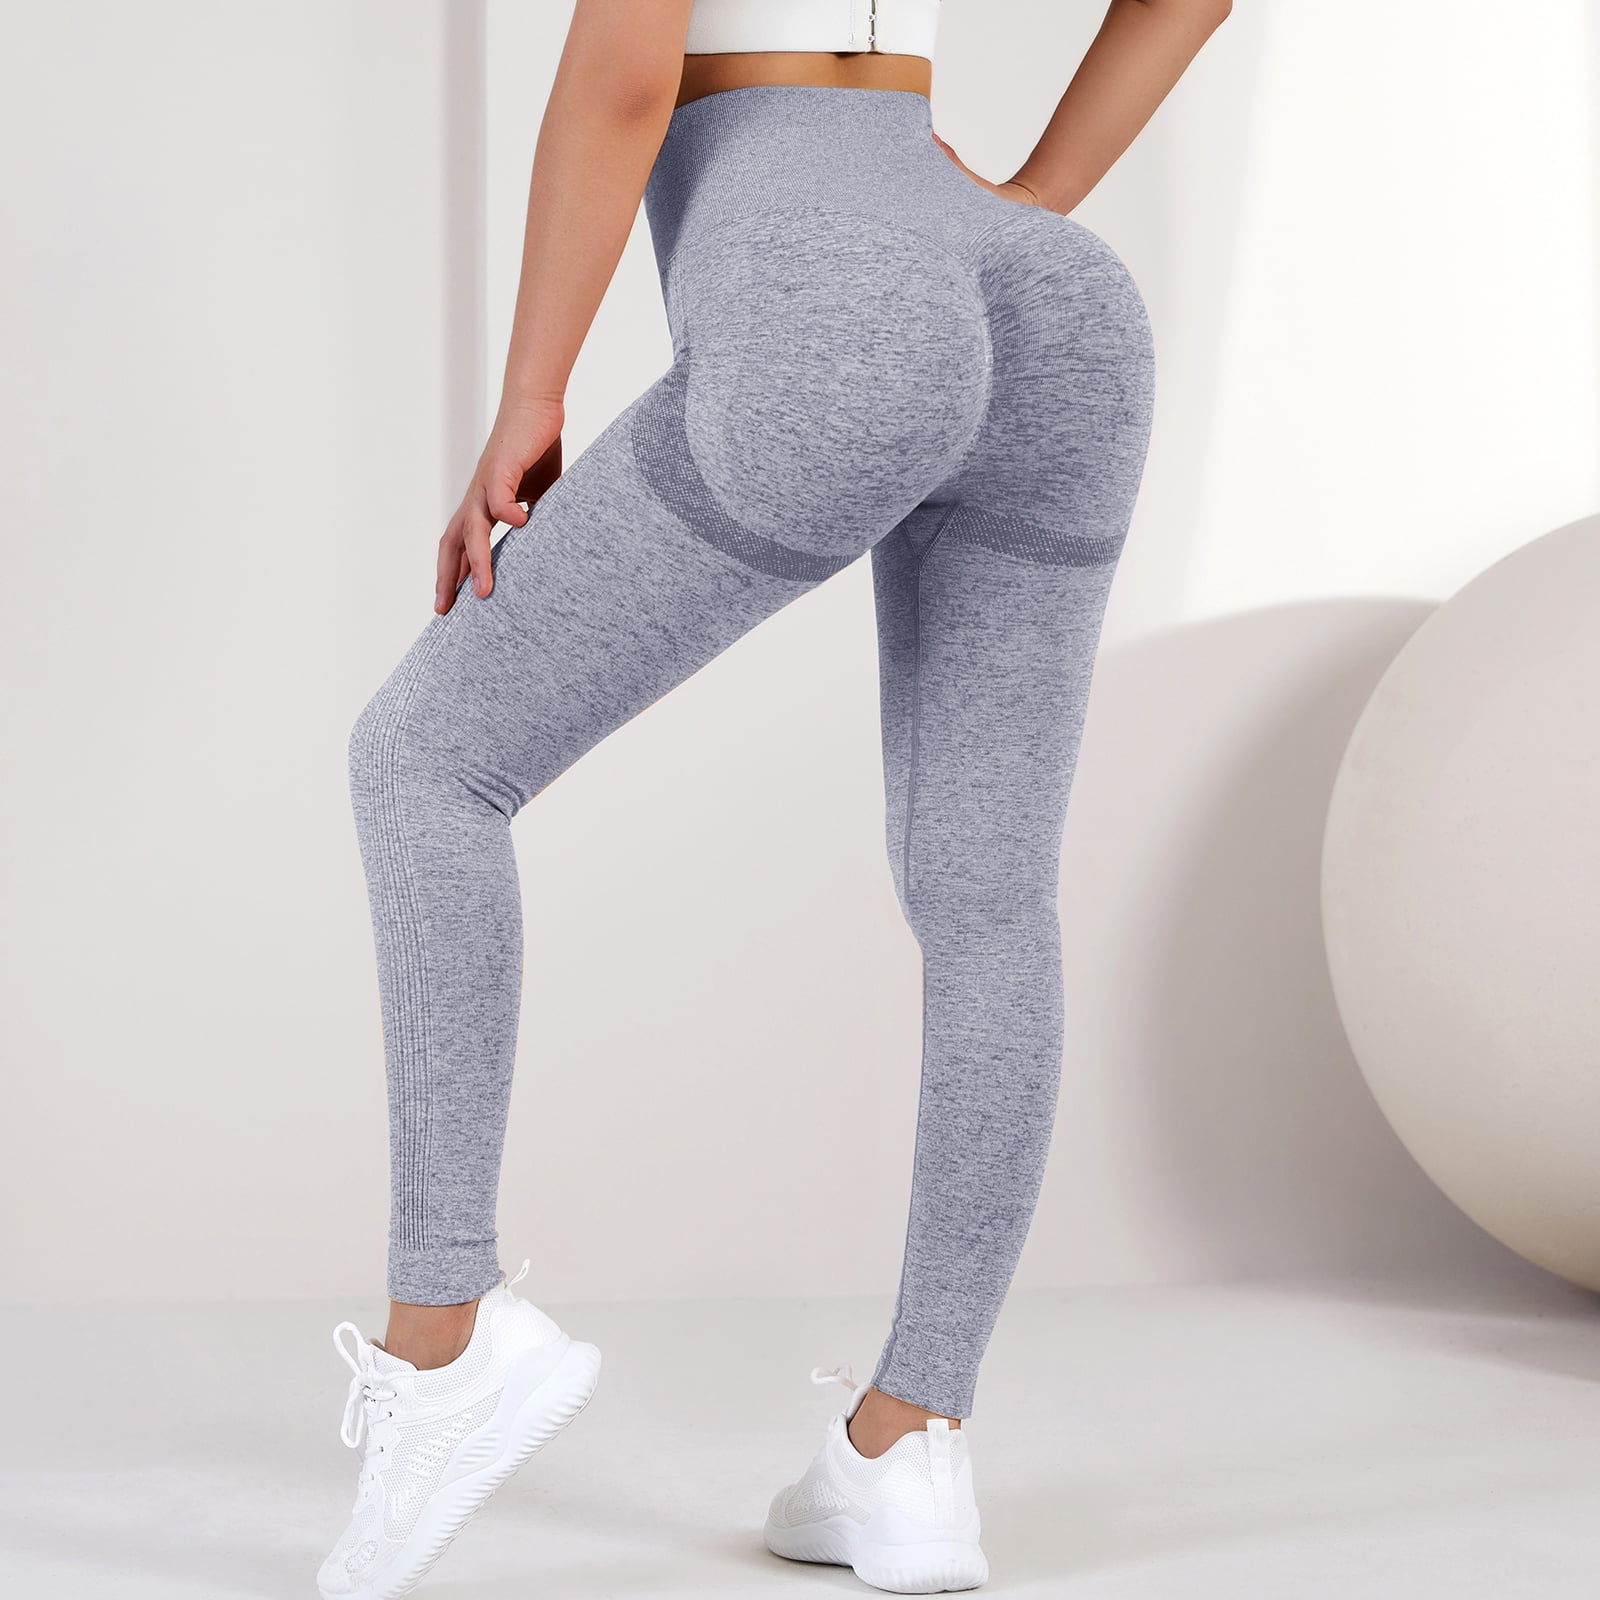 LASPERAL Women Gym Yoga Pants Sports Clothes Stretchy High Waist  Hip-lifting Tights Fitness Leggings Activewear Pants 